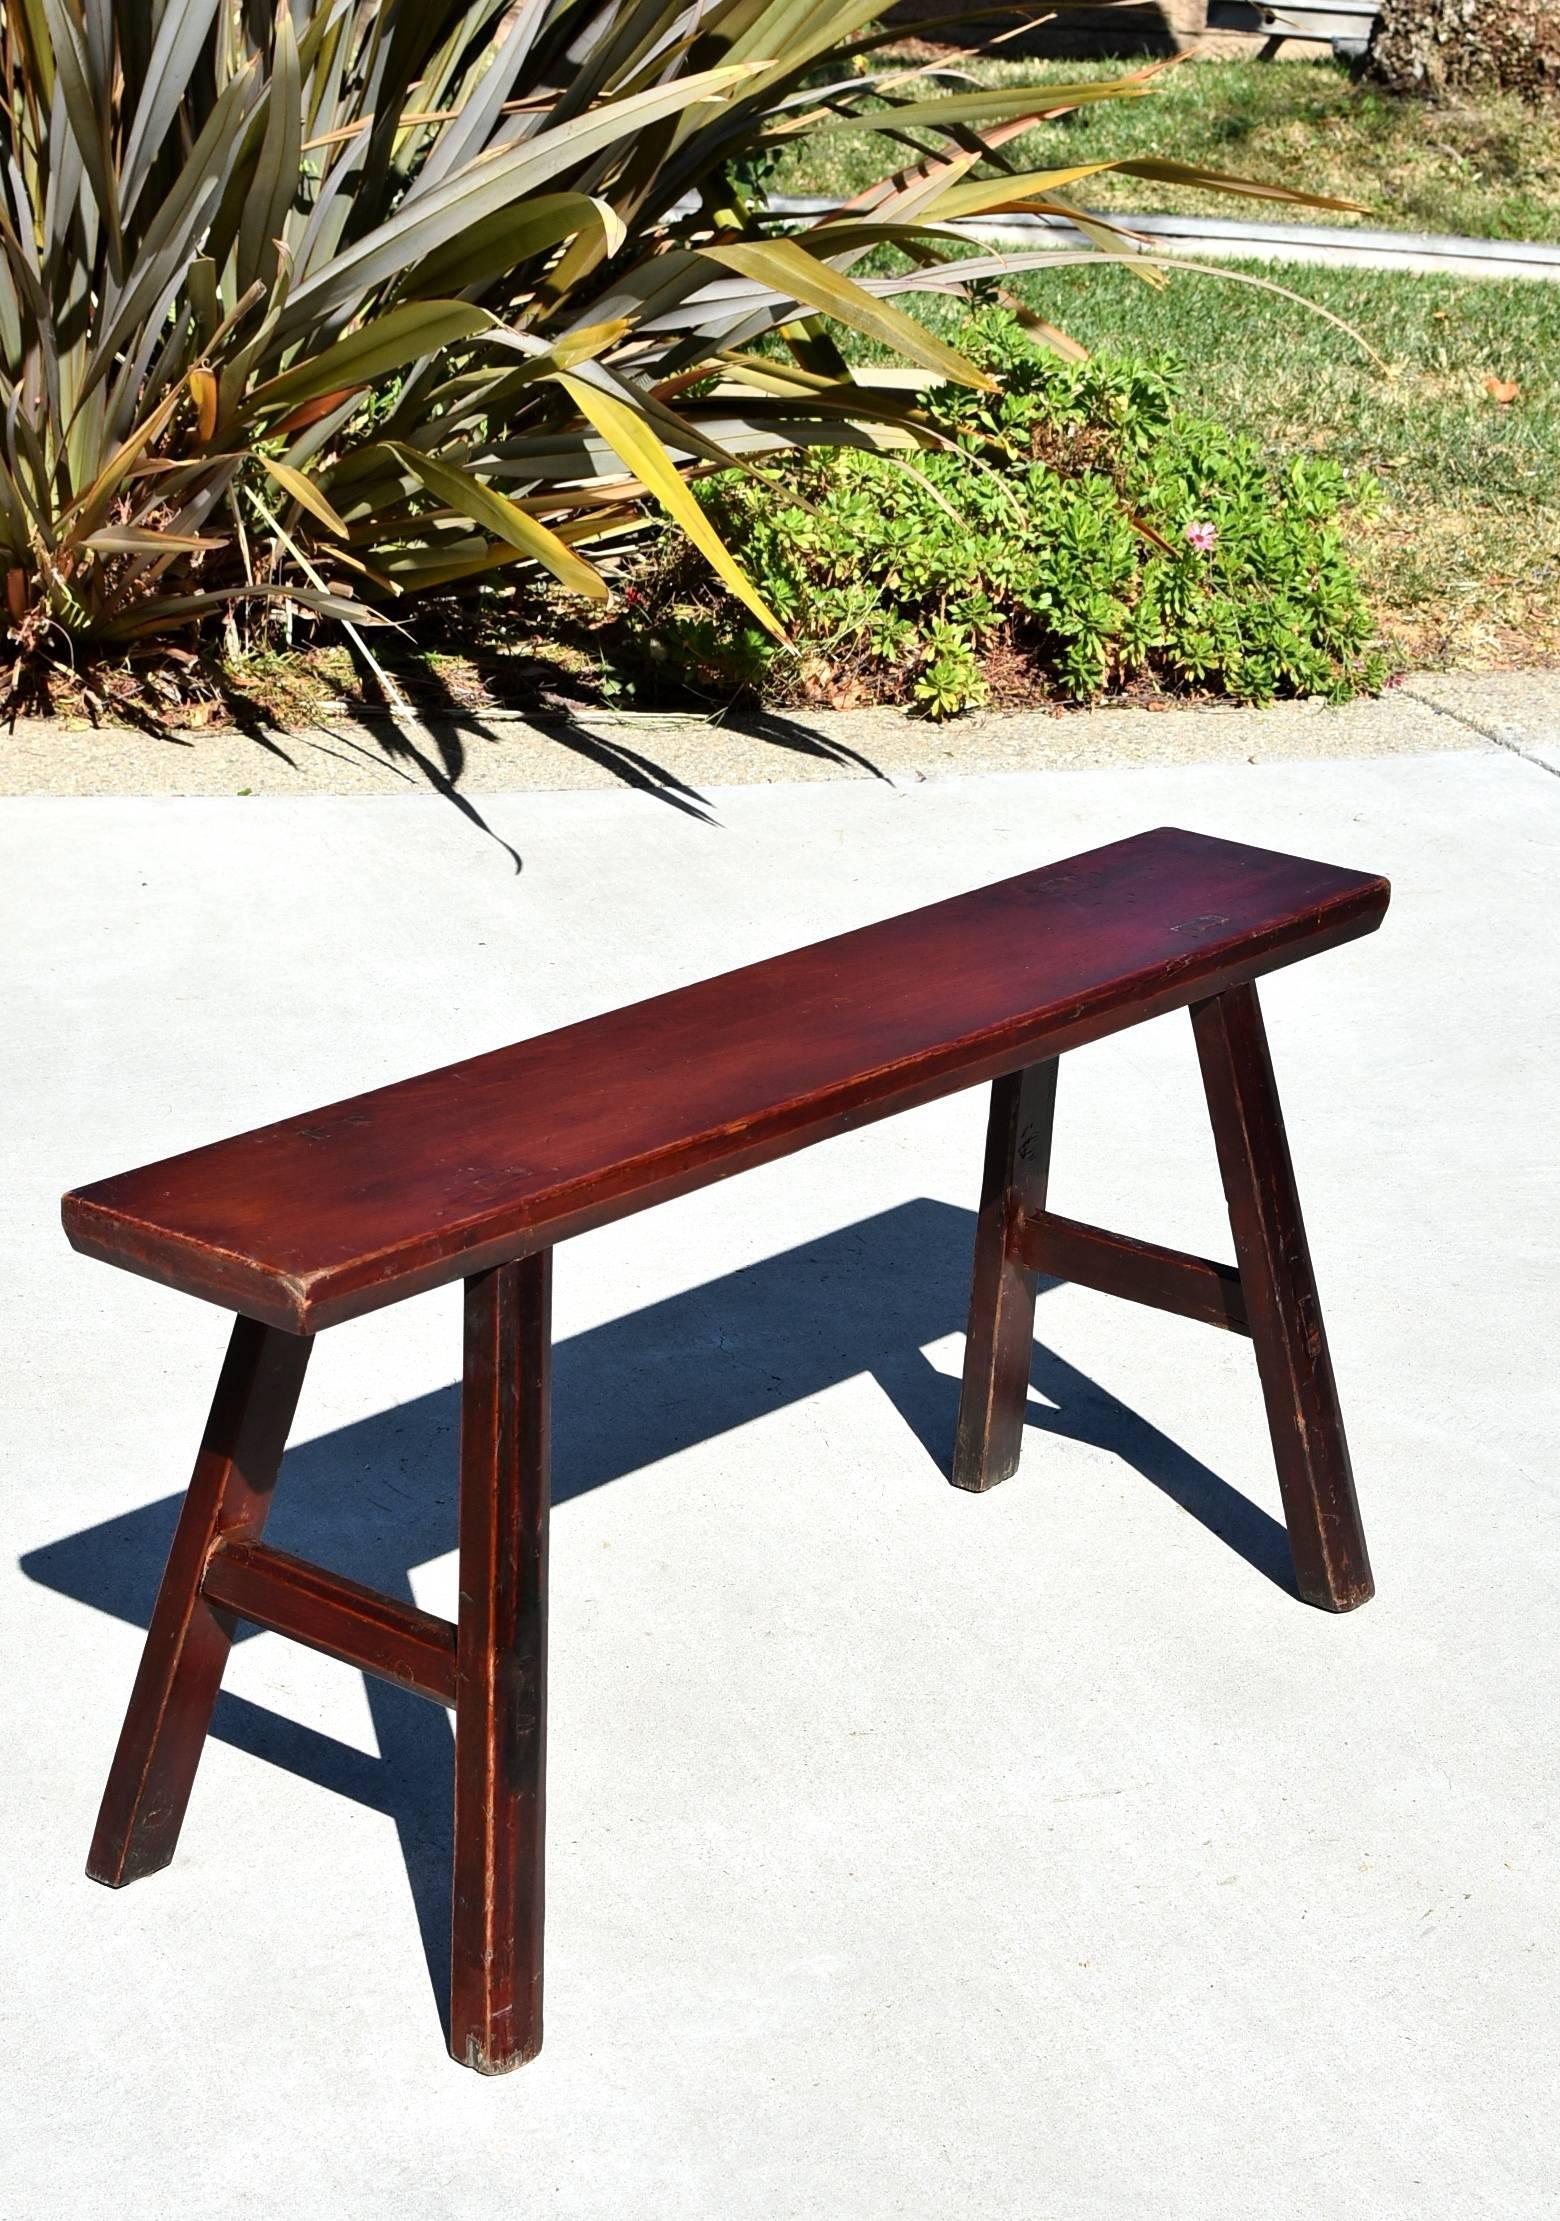 Joinery Antique Chinese Bench, Solid Wood, Reddish Brown